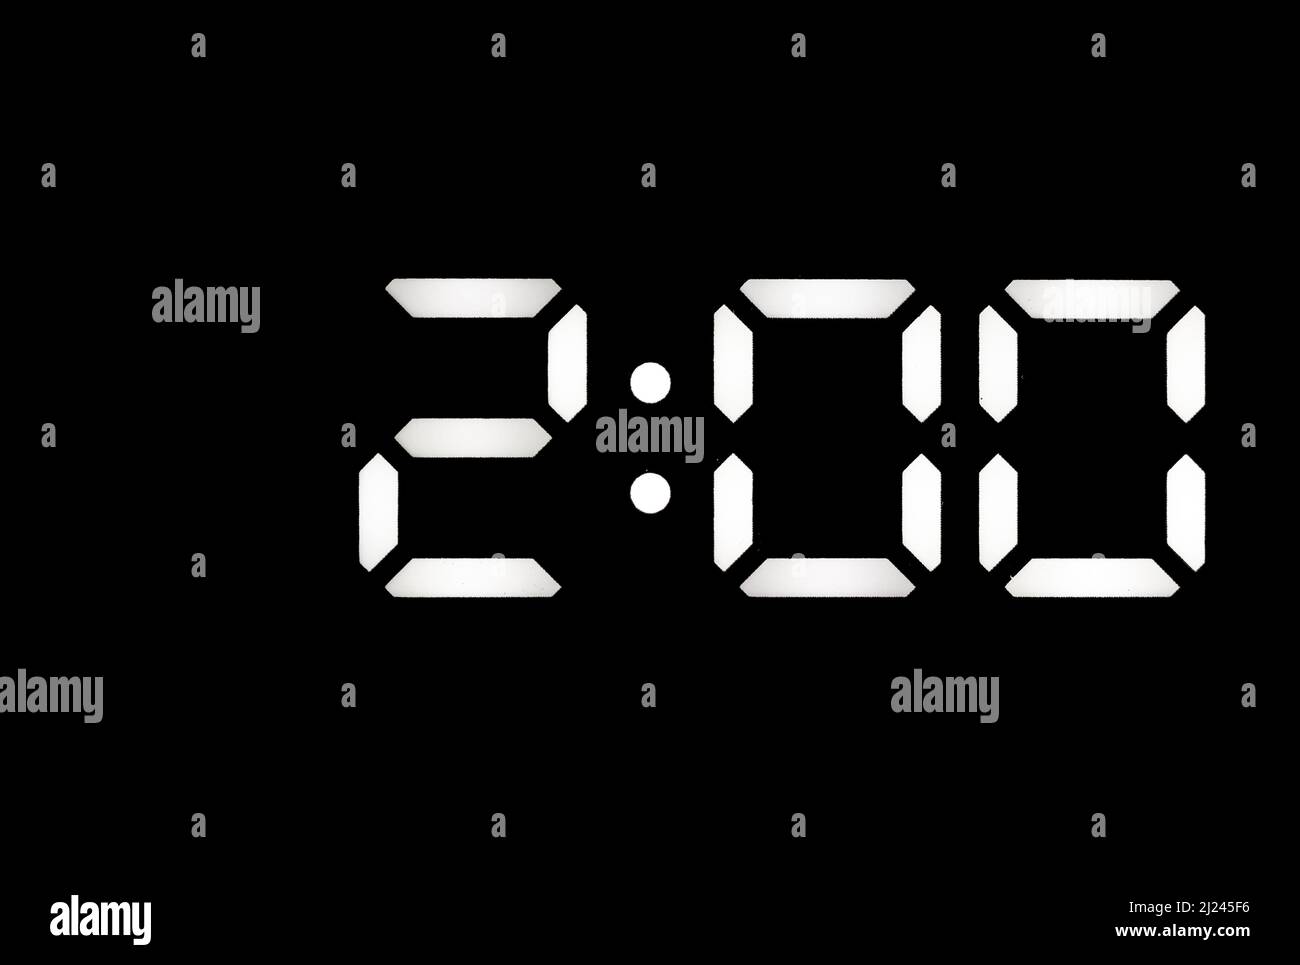 Real white led digital clock on a black background showing time 2:00 Stock Photo